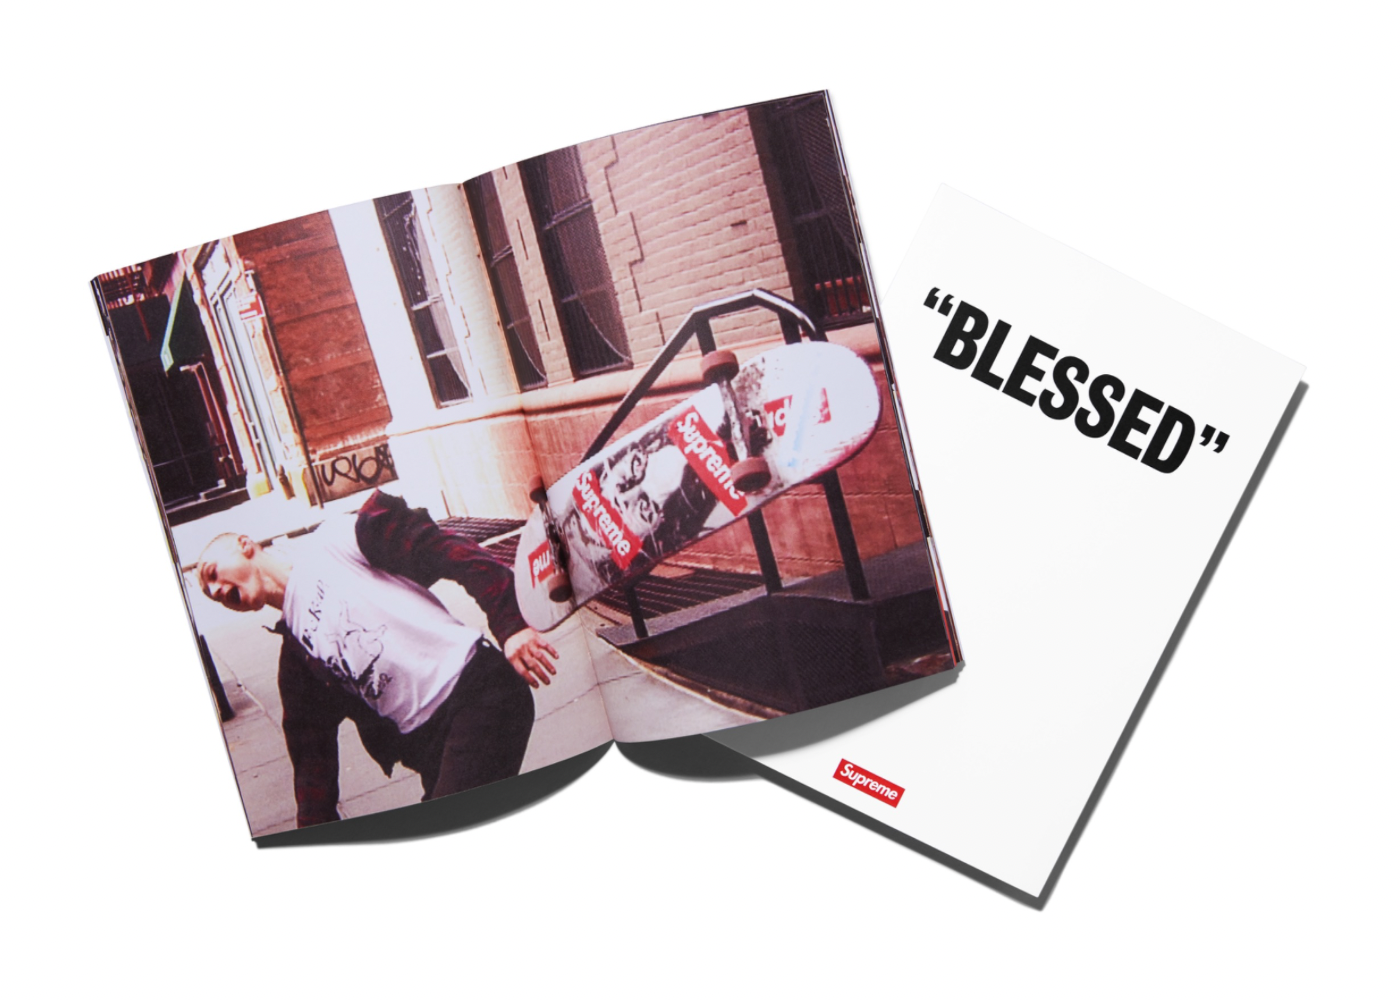 Supreme "Blessed" DVD and Photo Book Multicolor